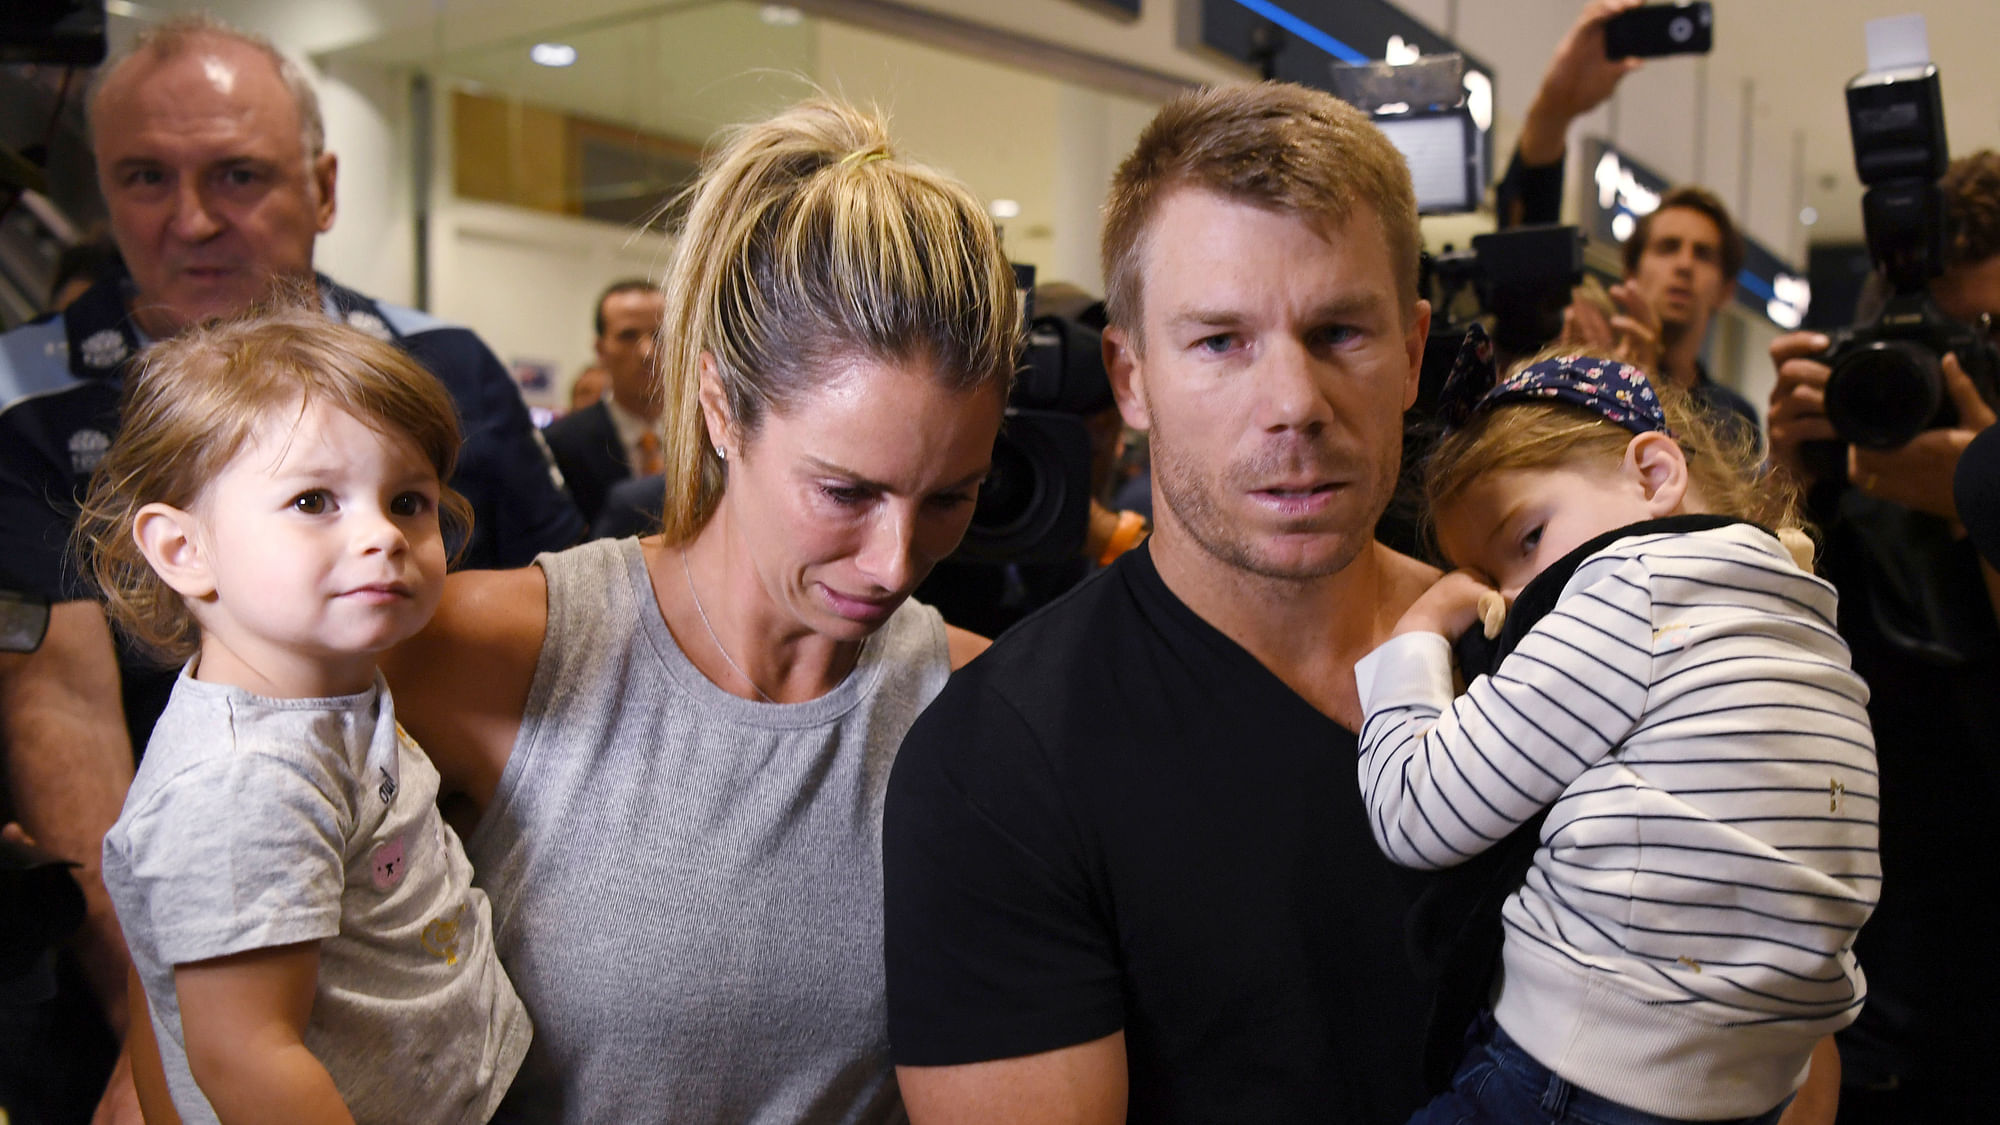 David Warner and his wife Candice at the Sydney airport with their daughters.